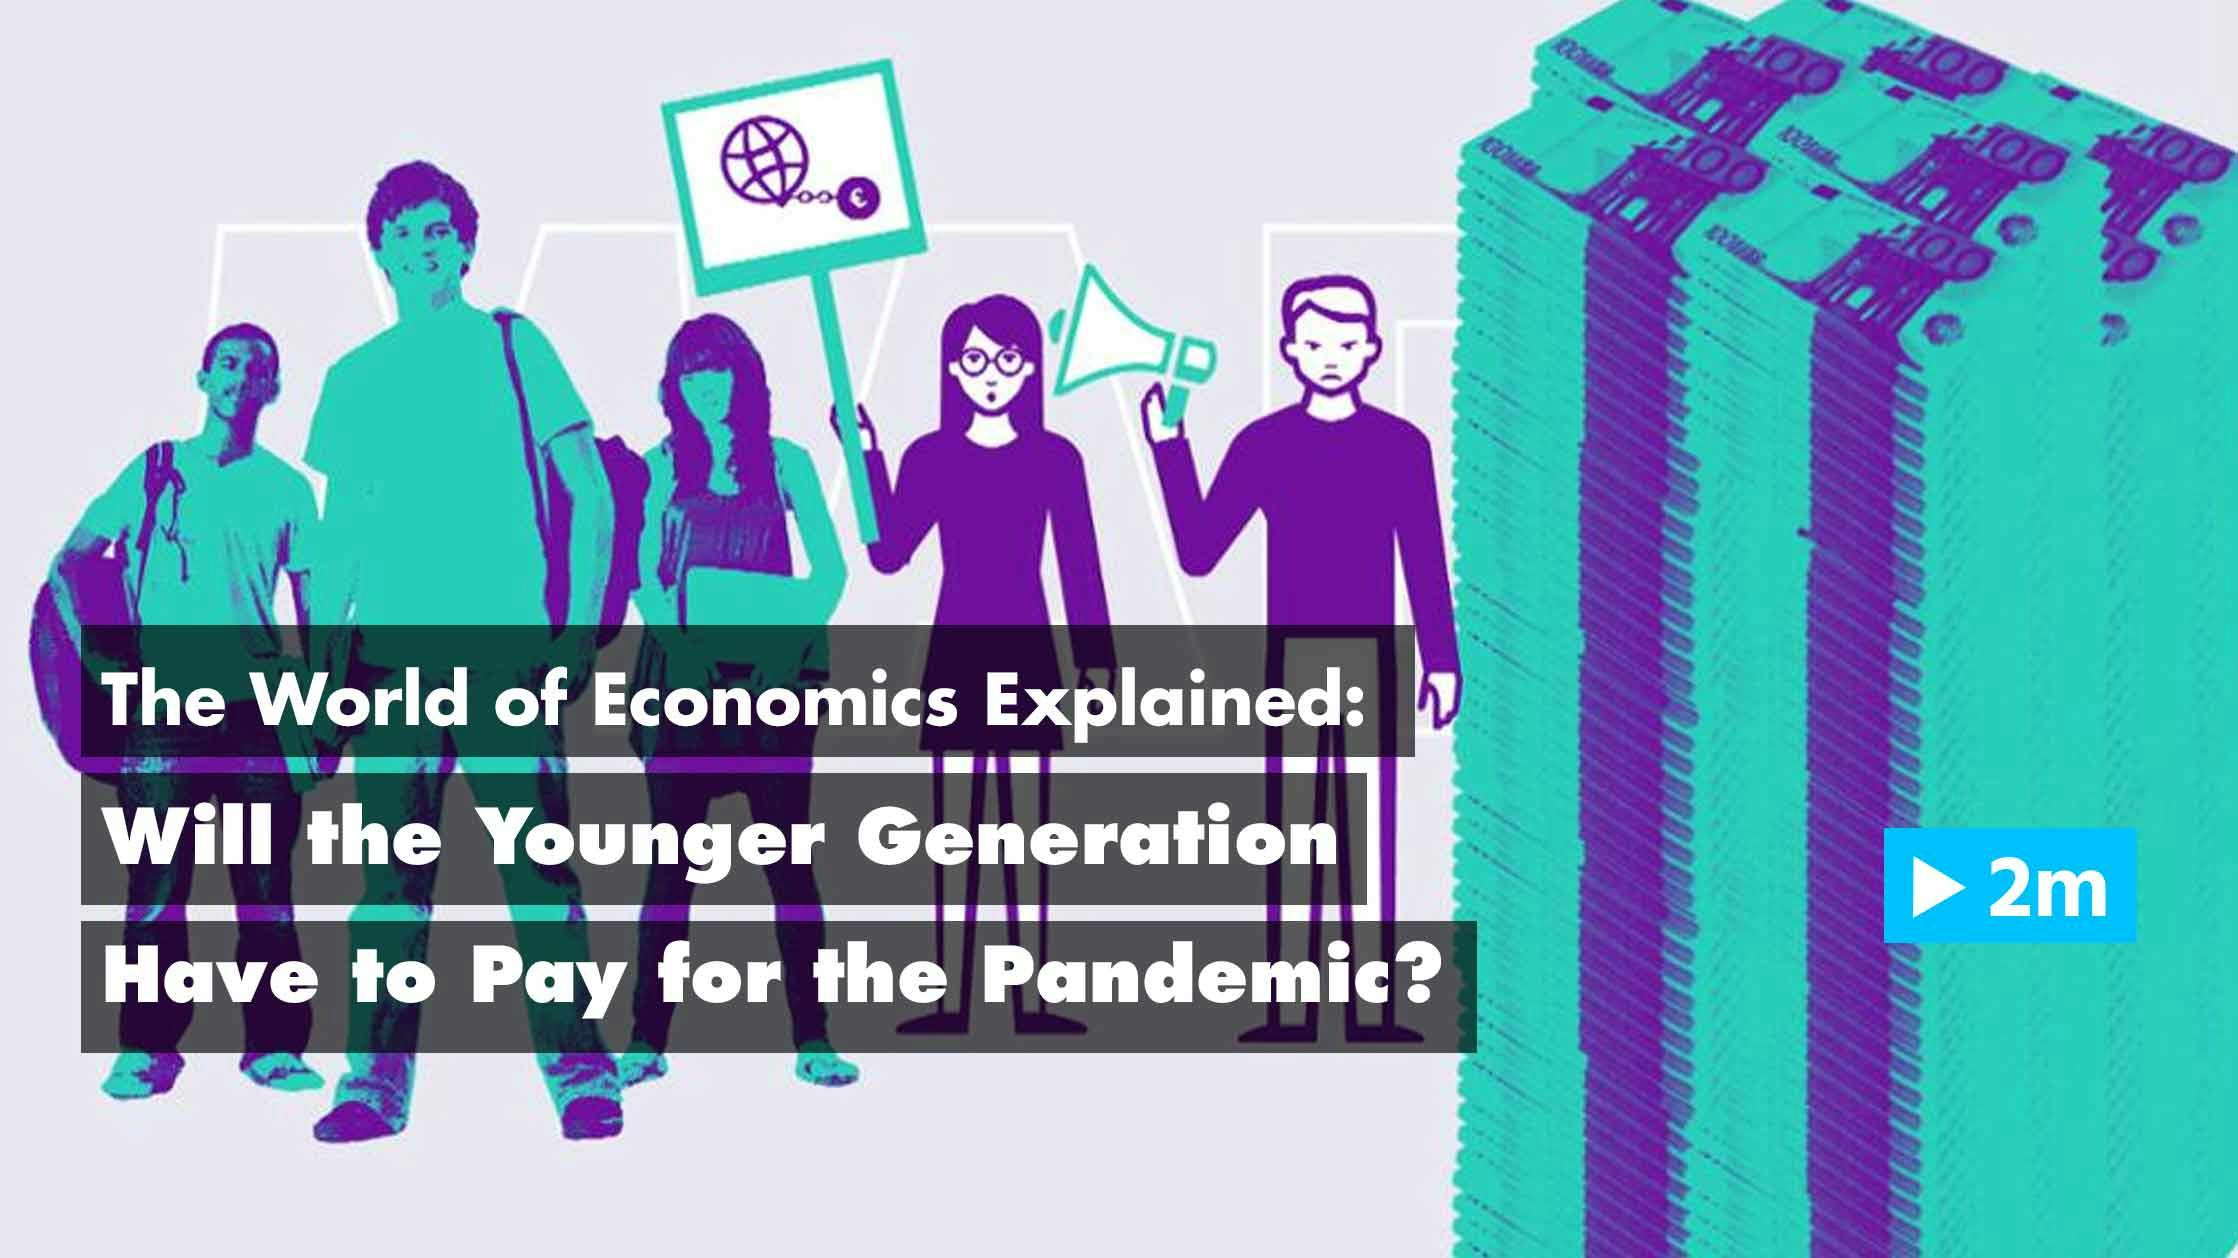 The World of Economics Explained: Will the Younger Generation Have to Pay for the Pandemic?